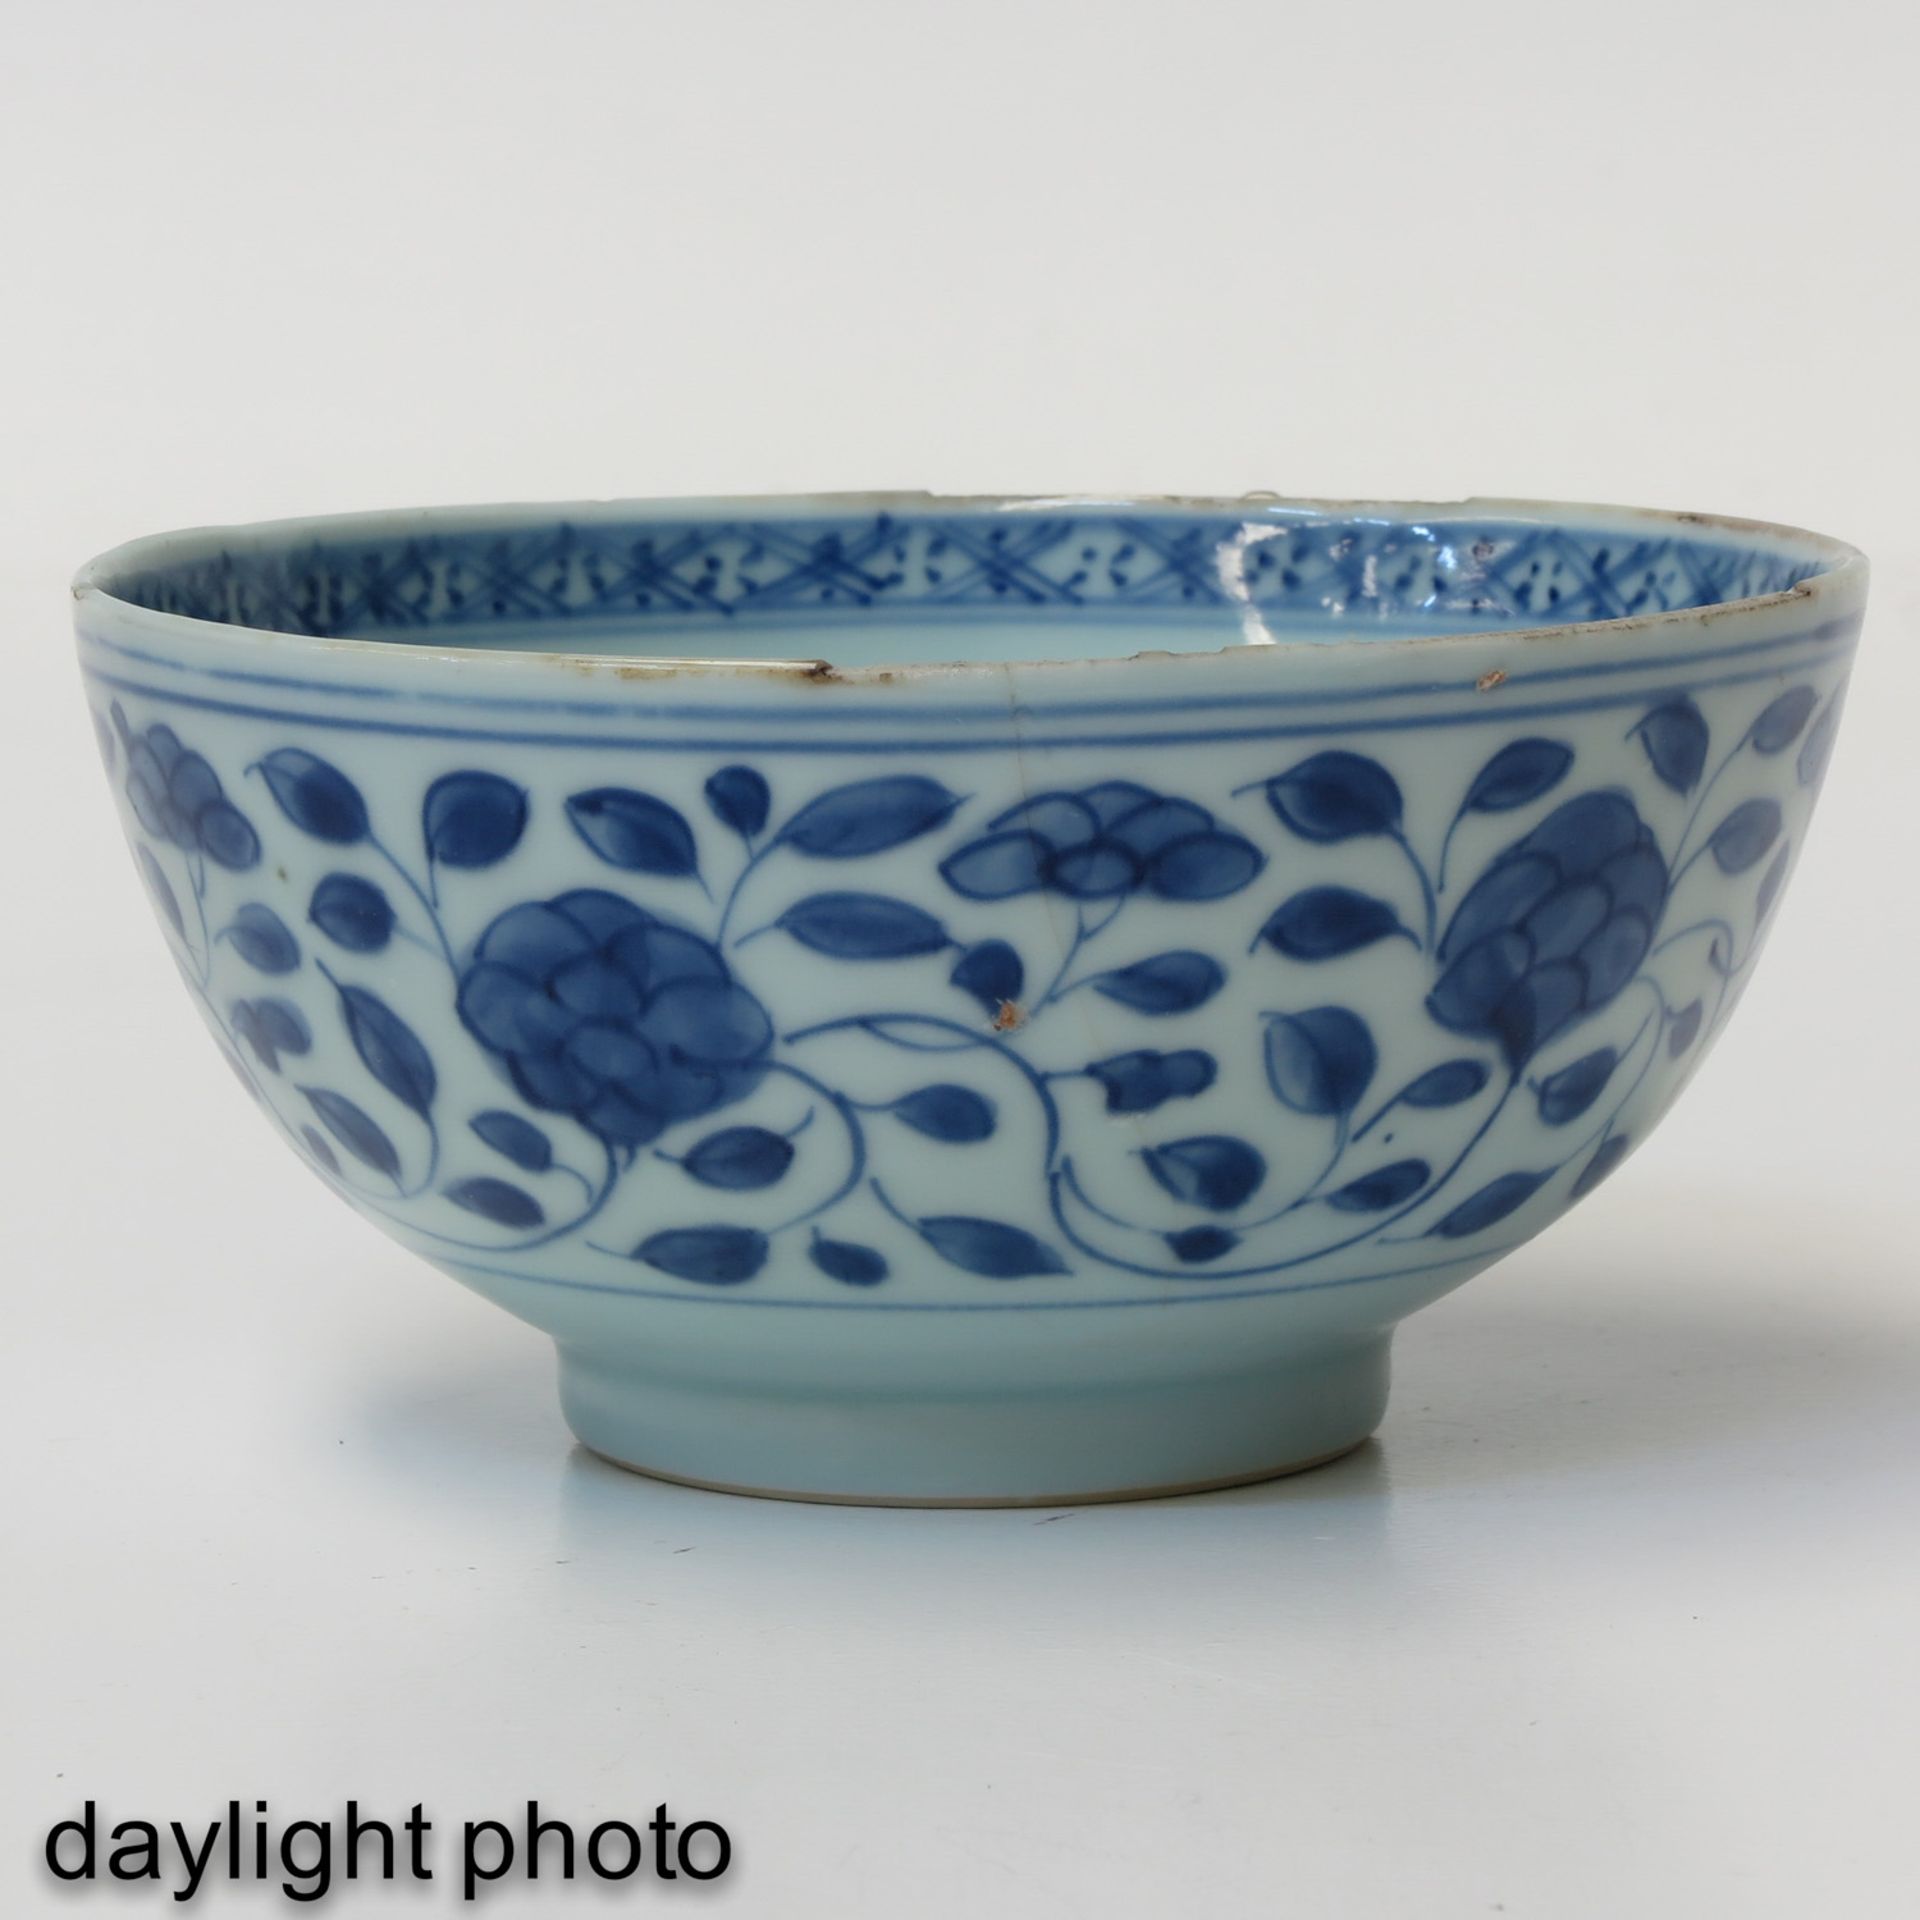 A Series of 3 Blue and White Bowls - Image 7 of 9